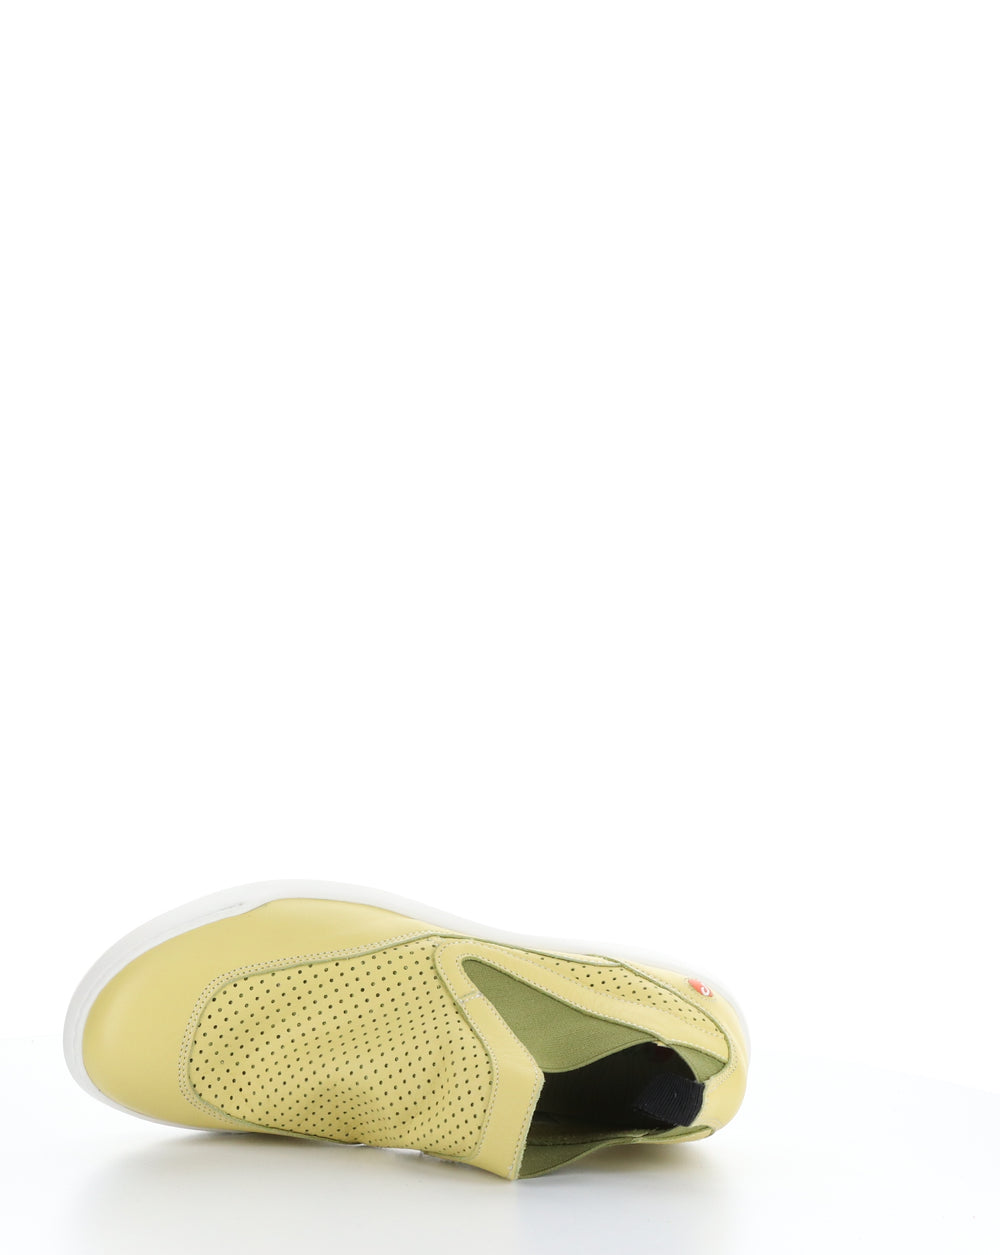 BRAY721SOF 004 LT YELLOW Elasticated Shoes